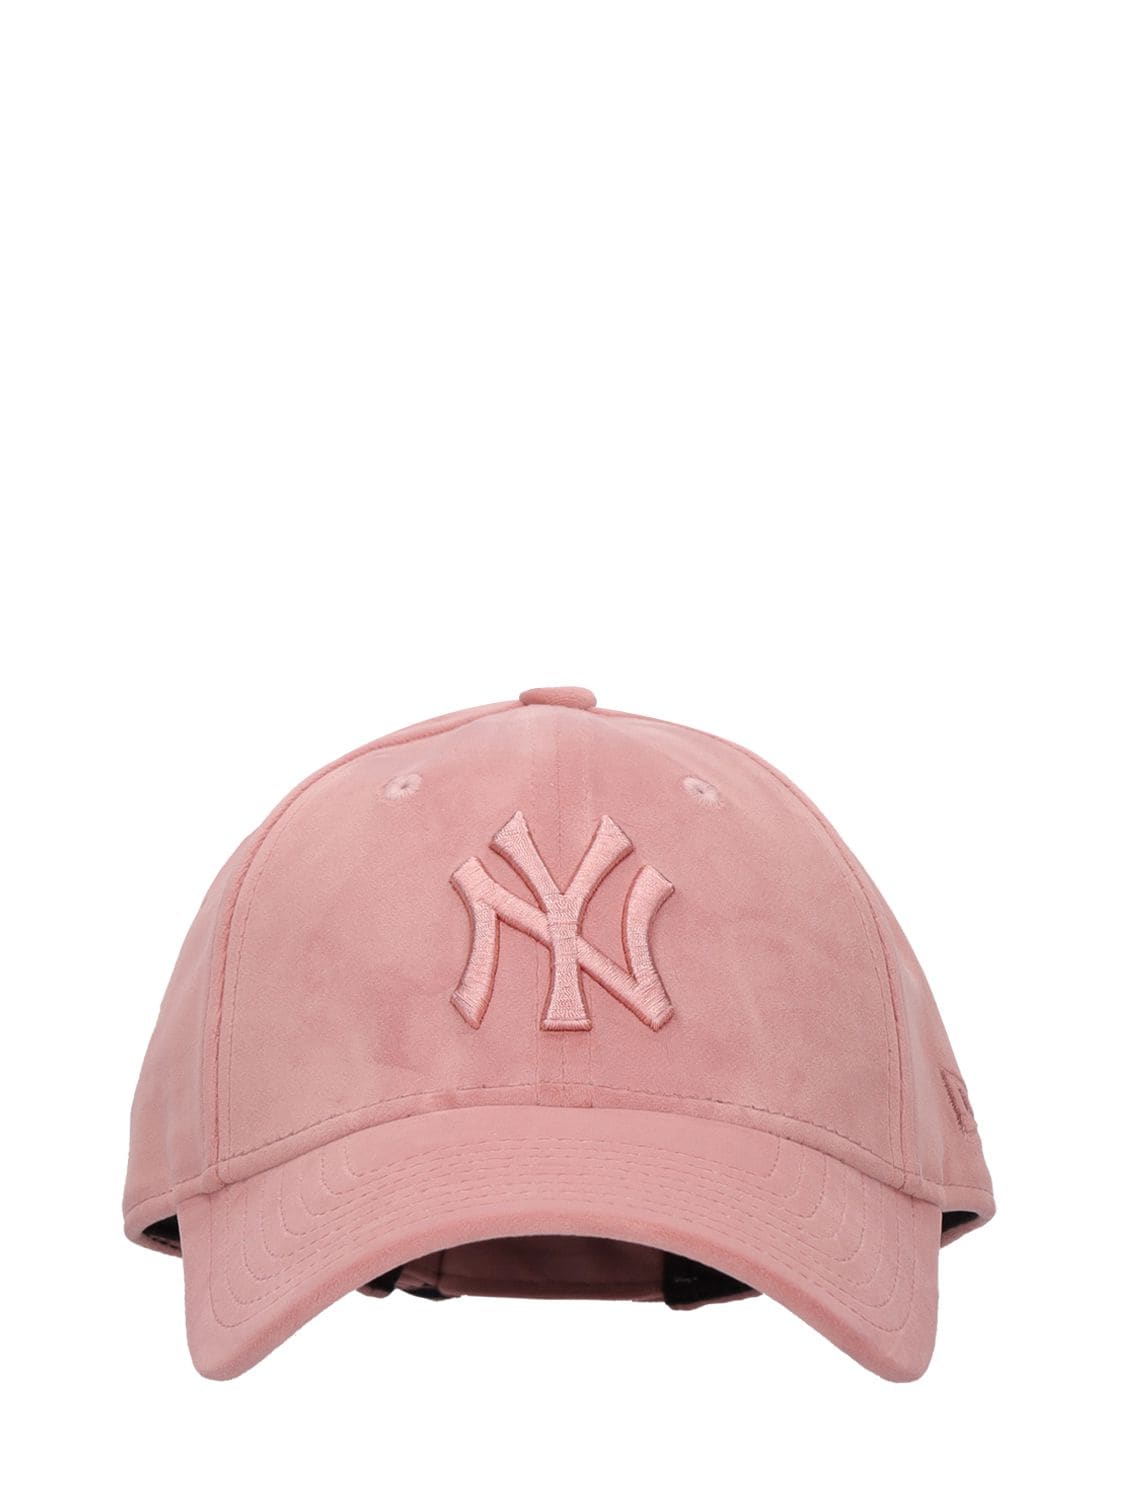 New Era 9forty Ny Yankees Velour Hat In Pink